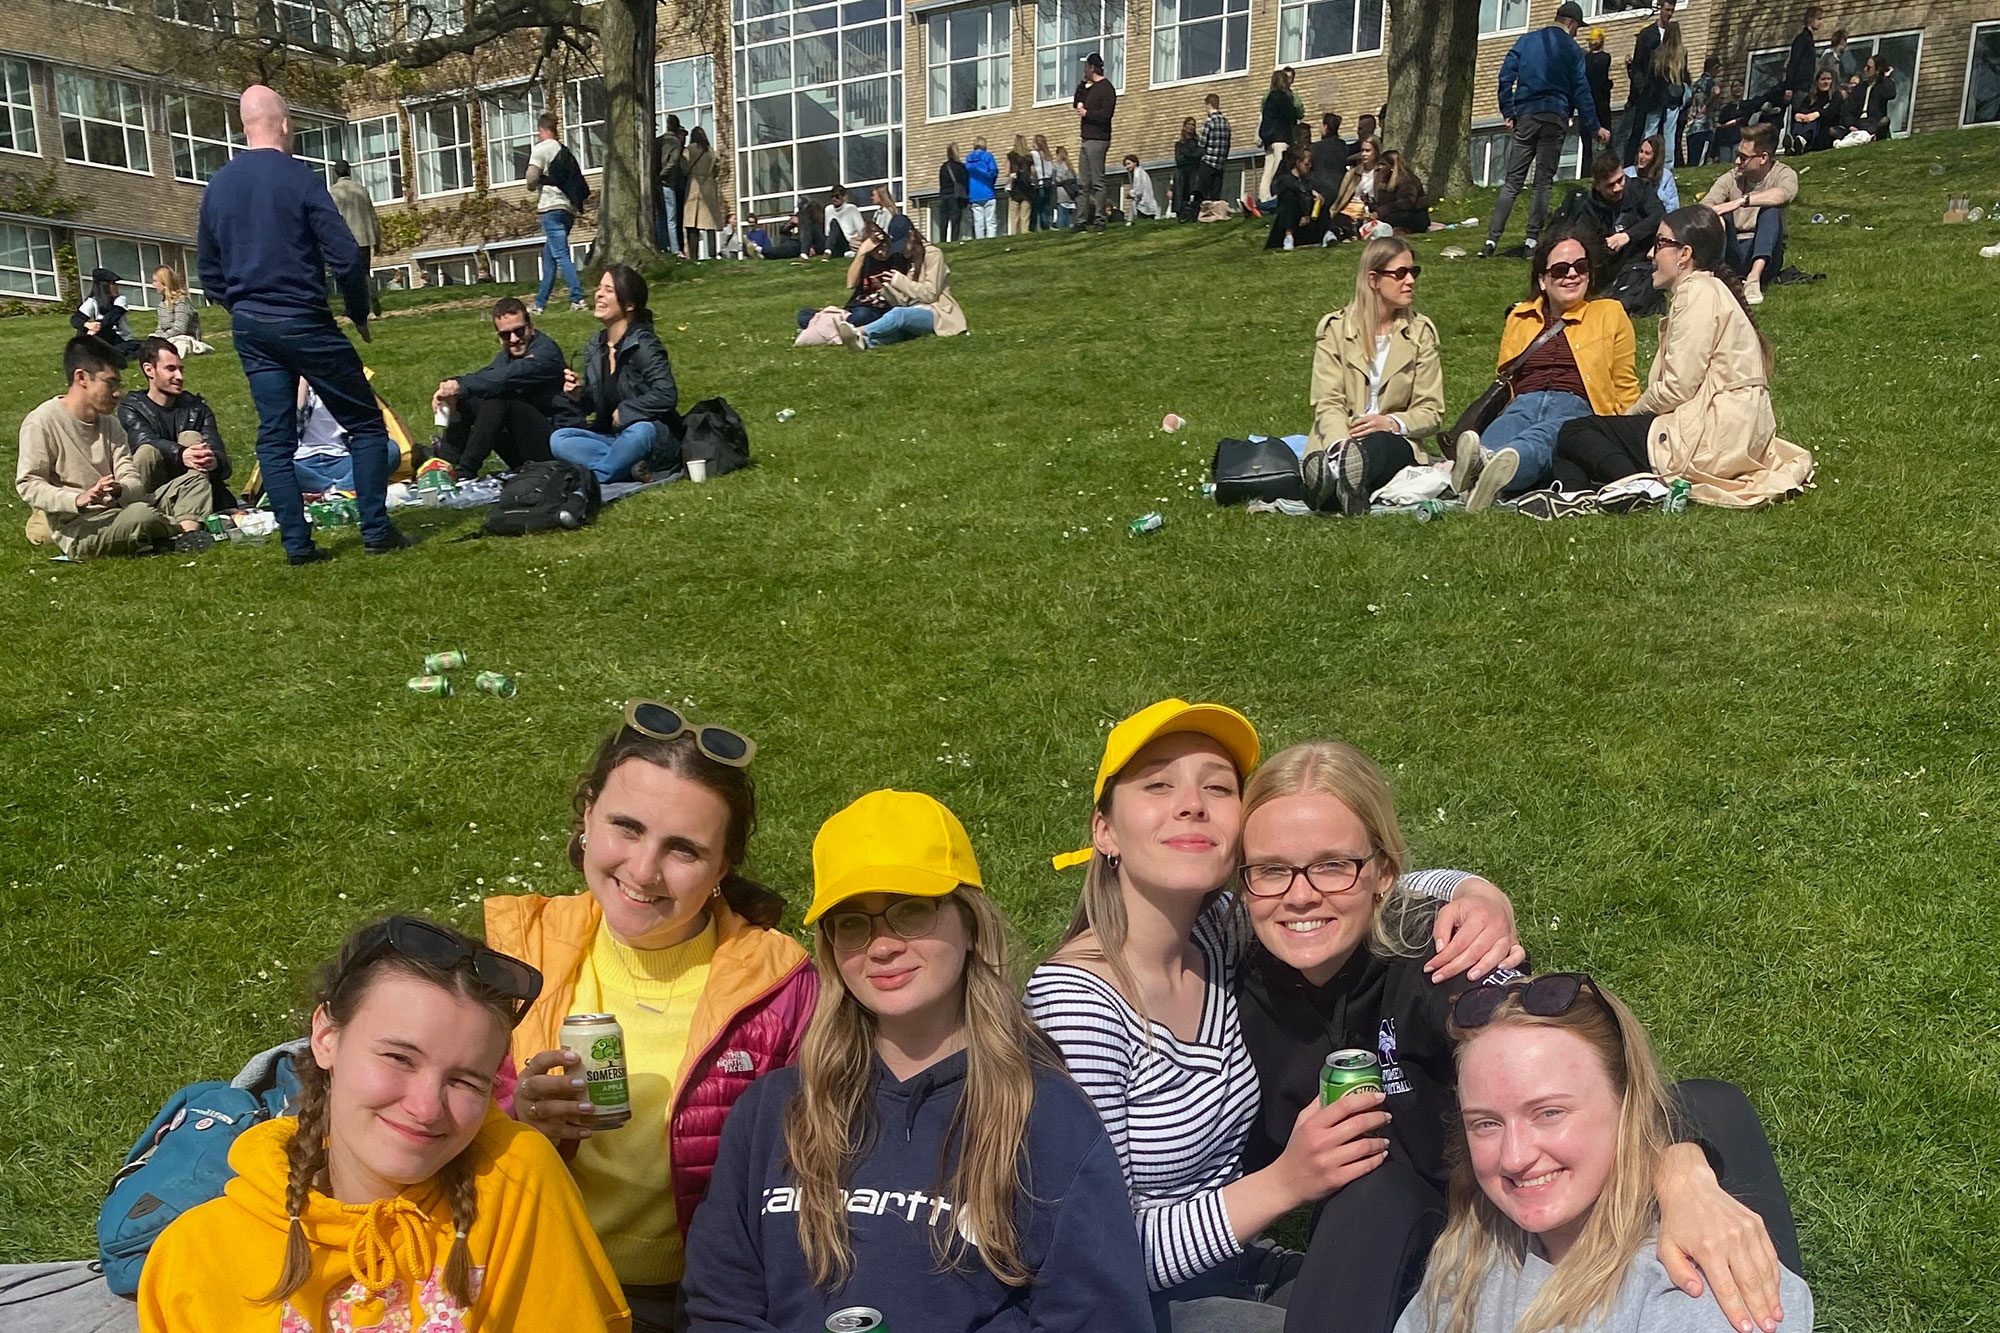 Group of students gathered on grass on campus, Aarhus, Denmark.